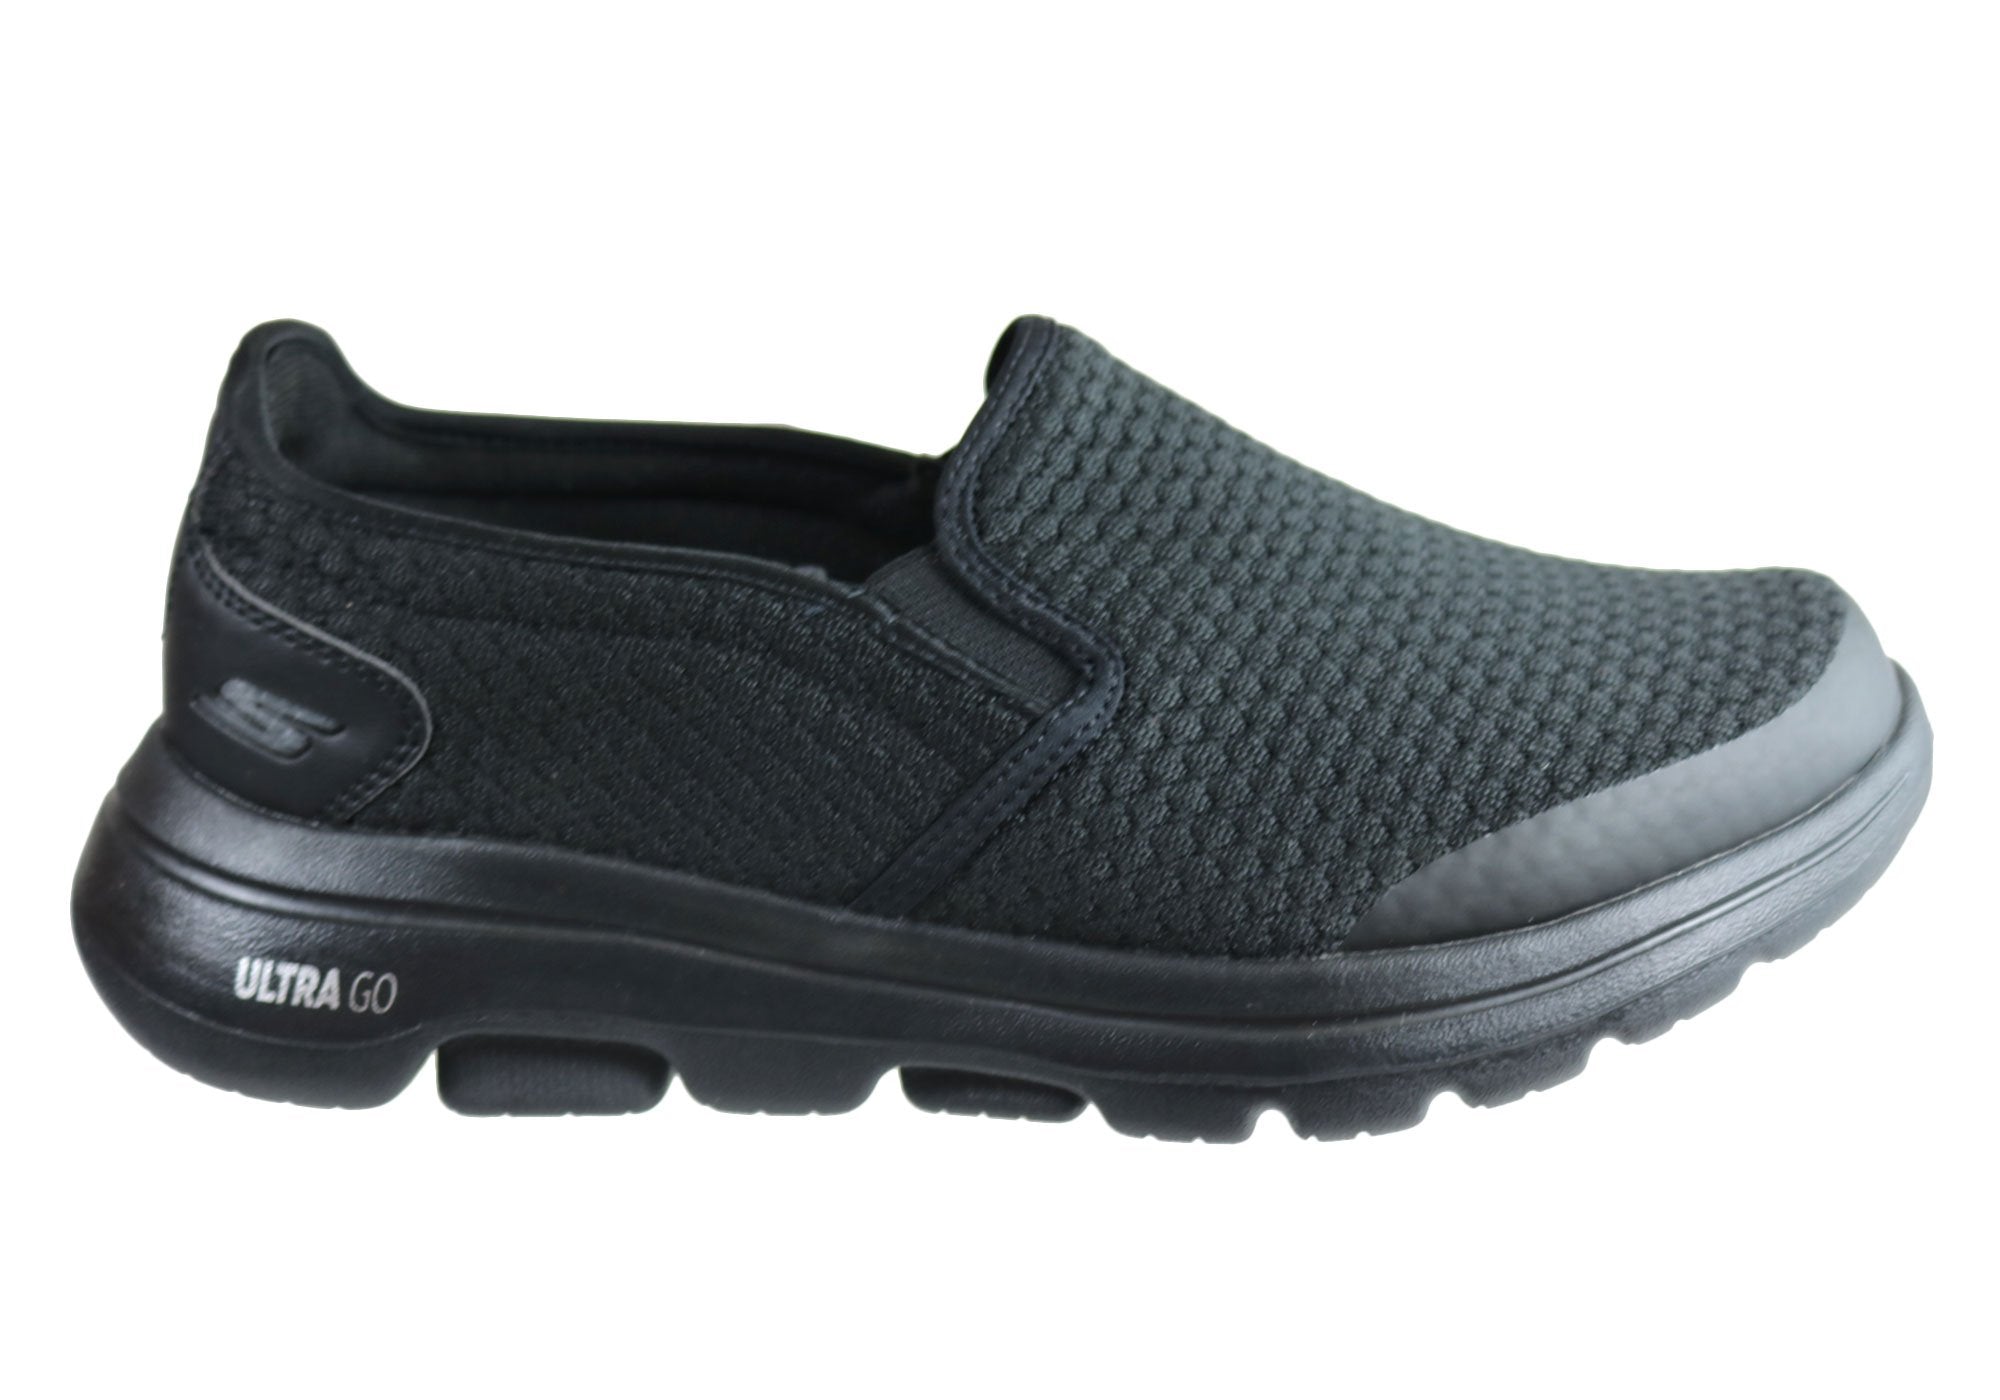 skechers wide fit shoes